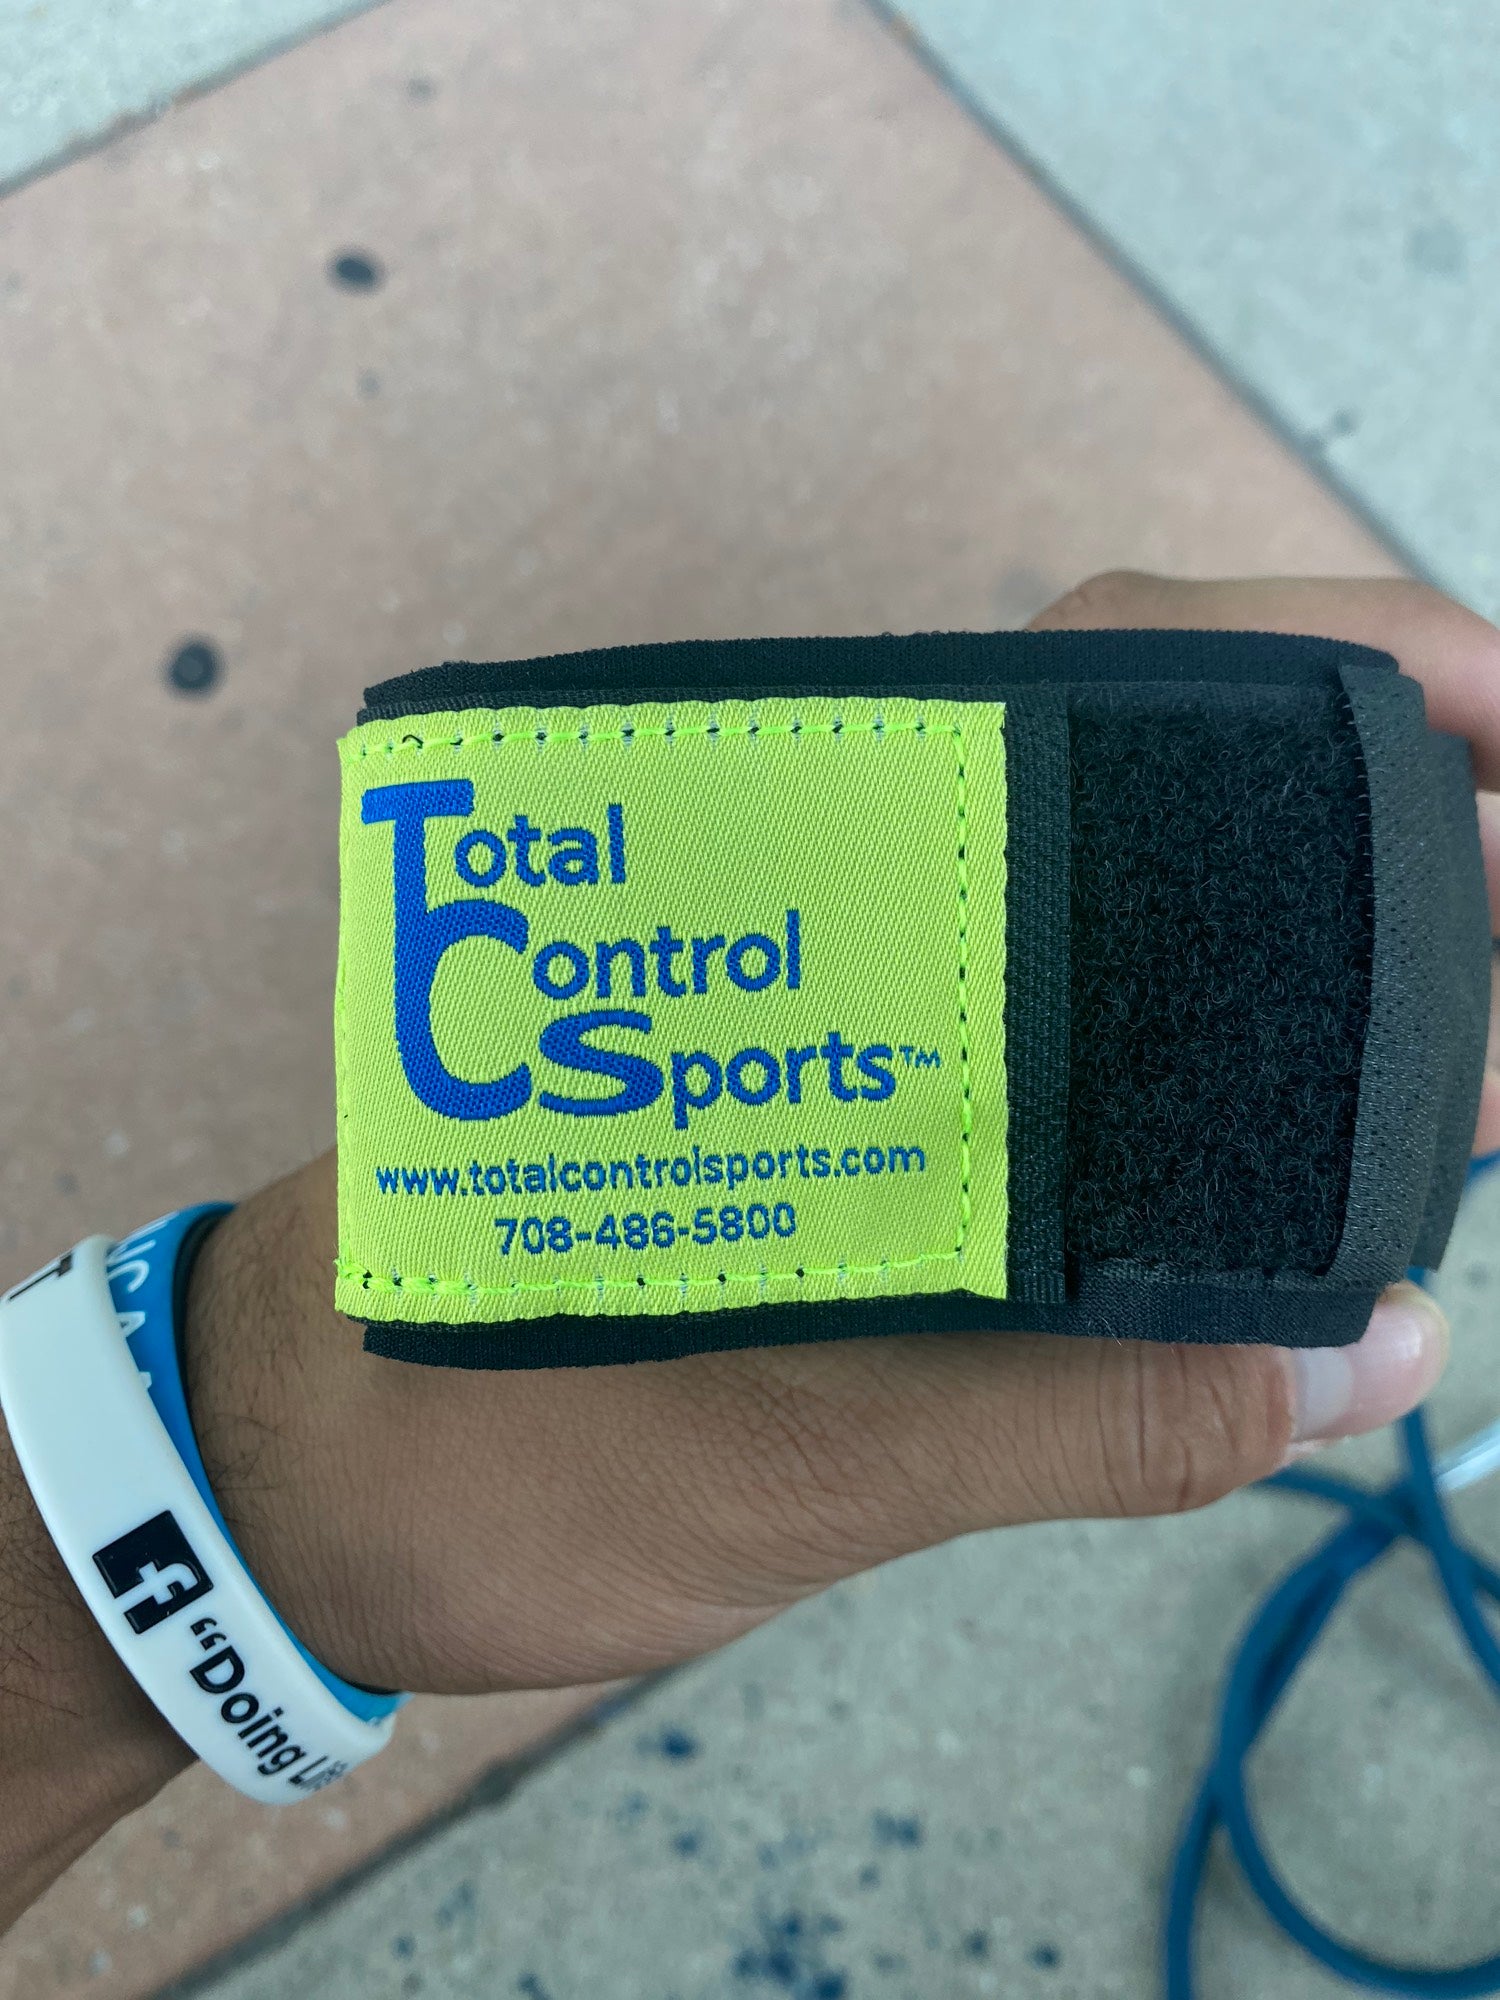 Total Control Sports